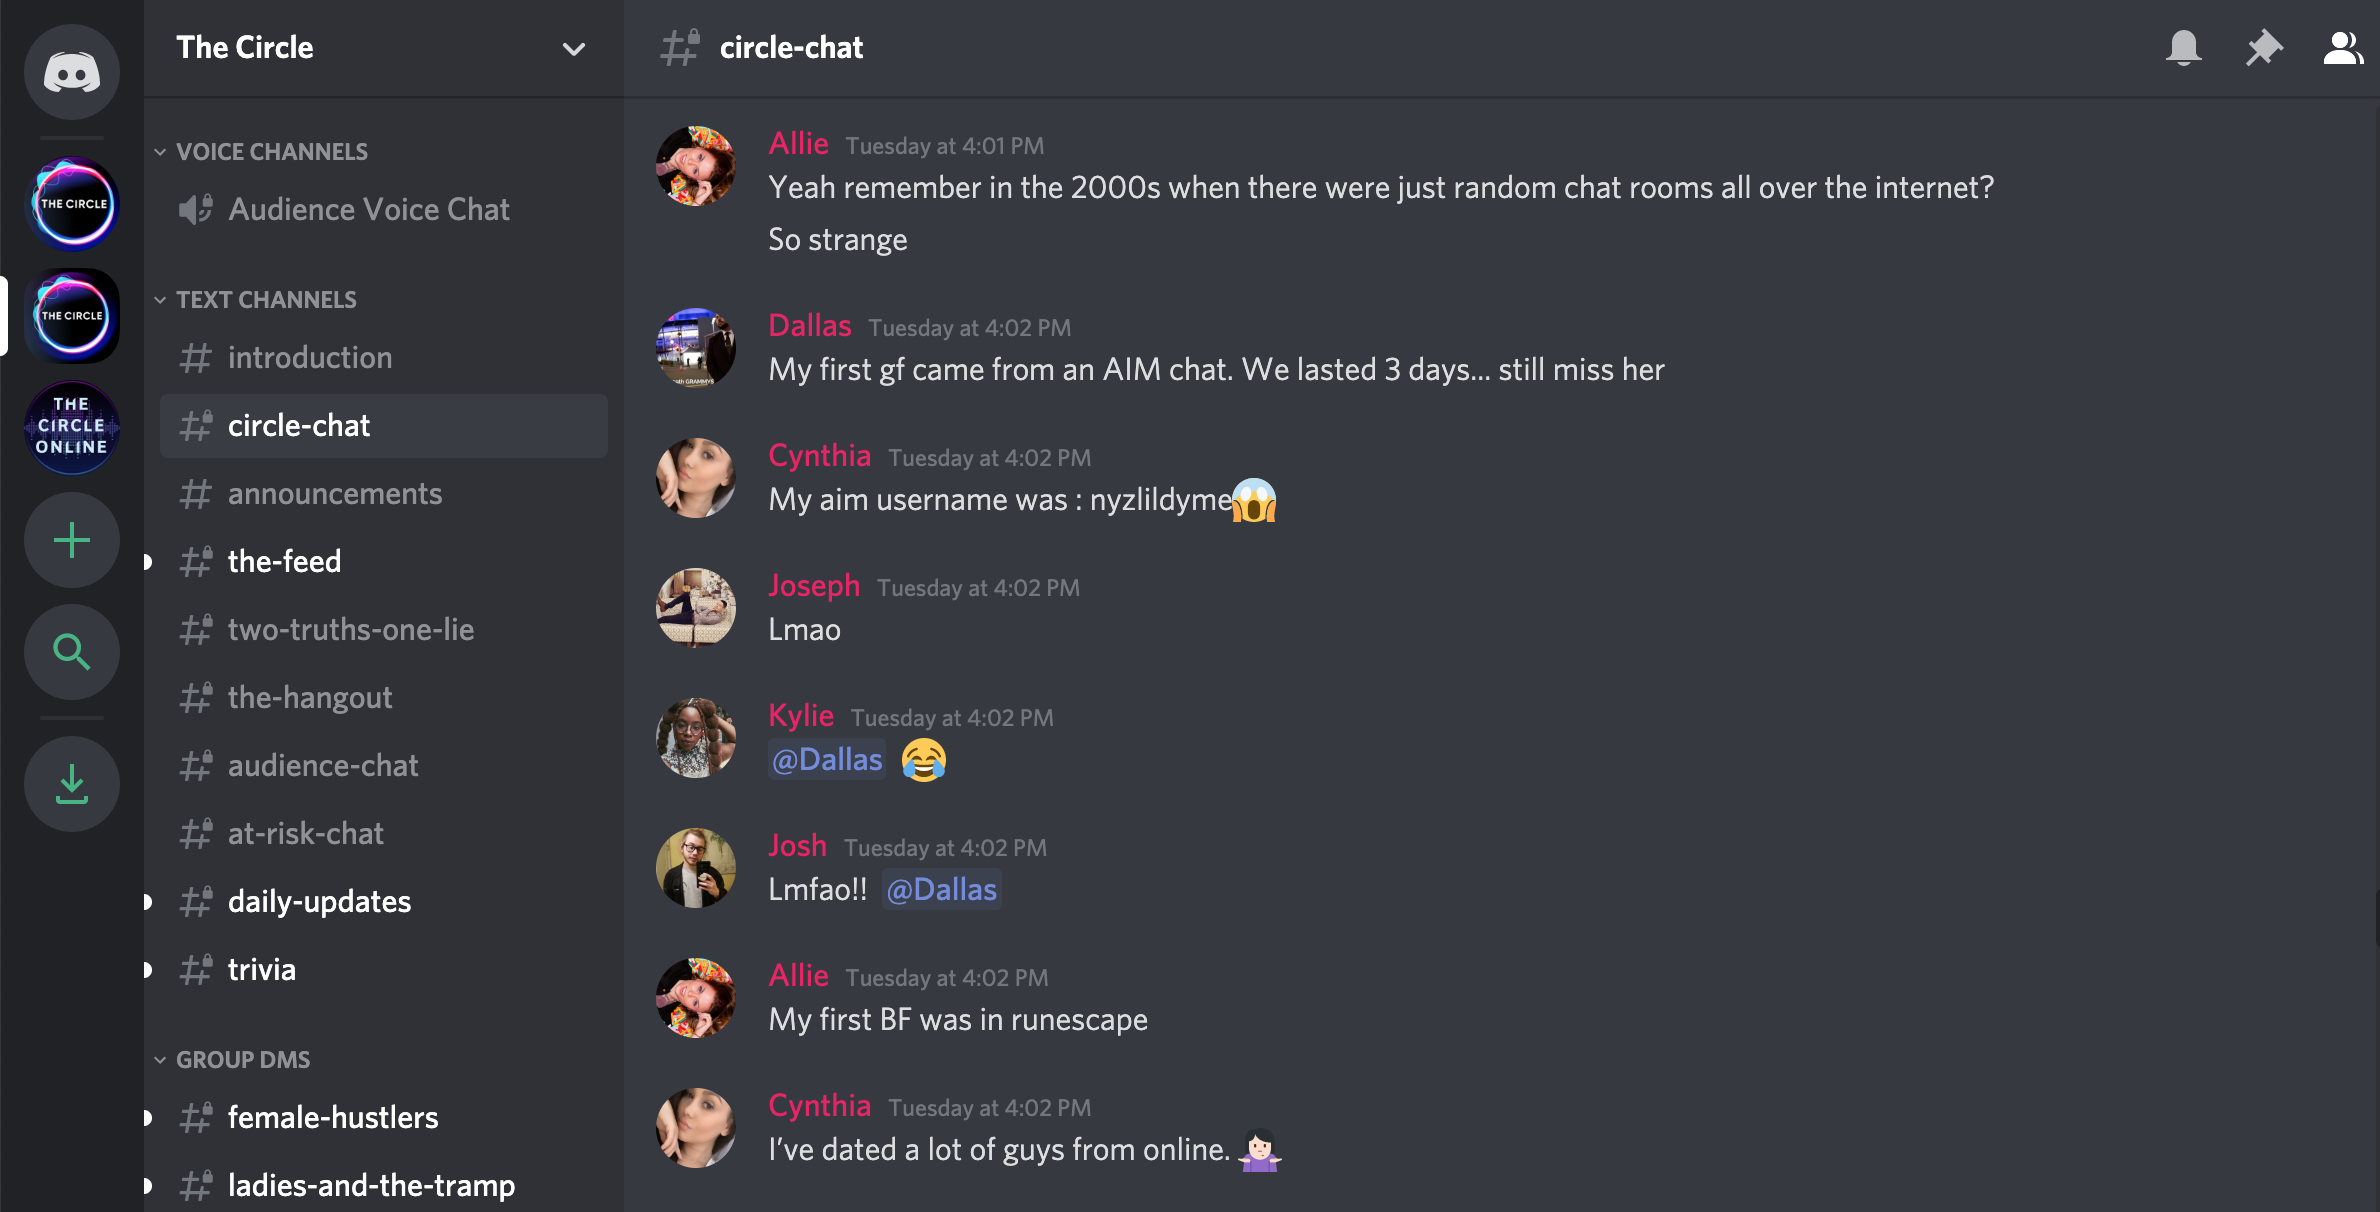 A screenshot of the #circle-chat on "The Circle" server (Discord)